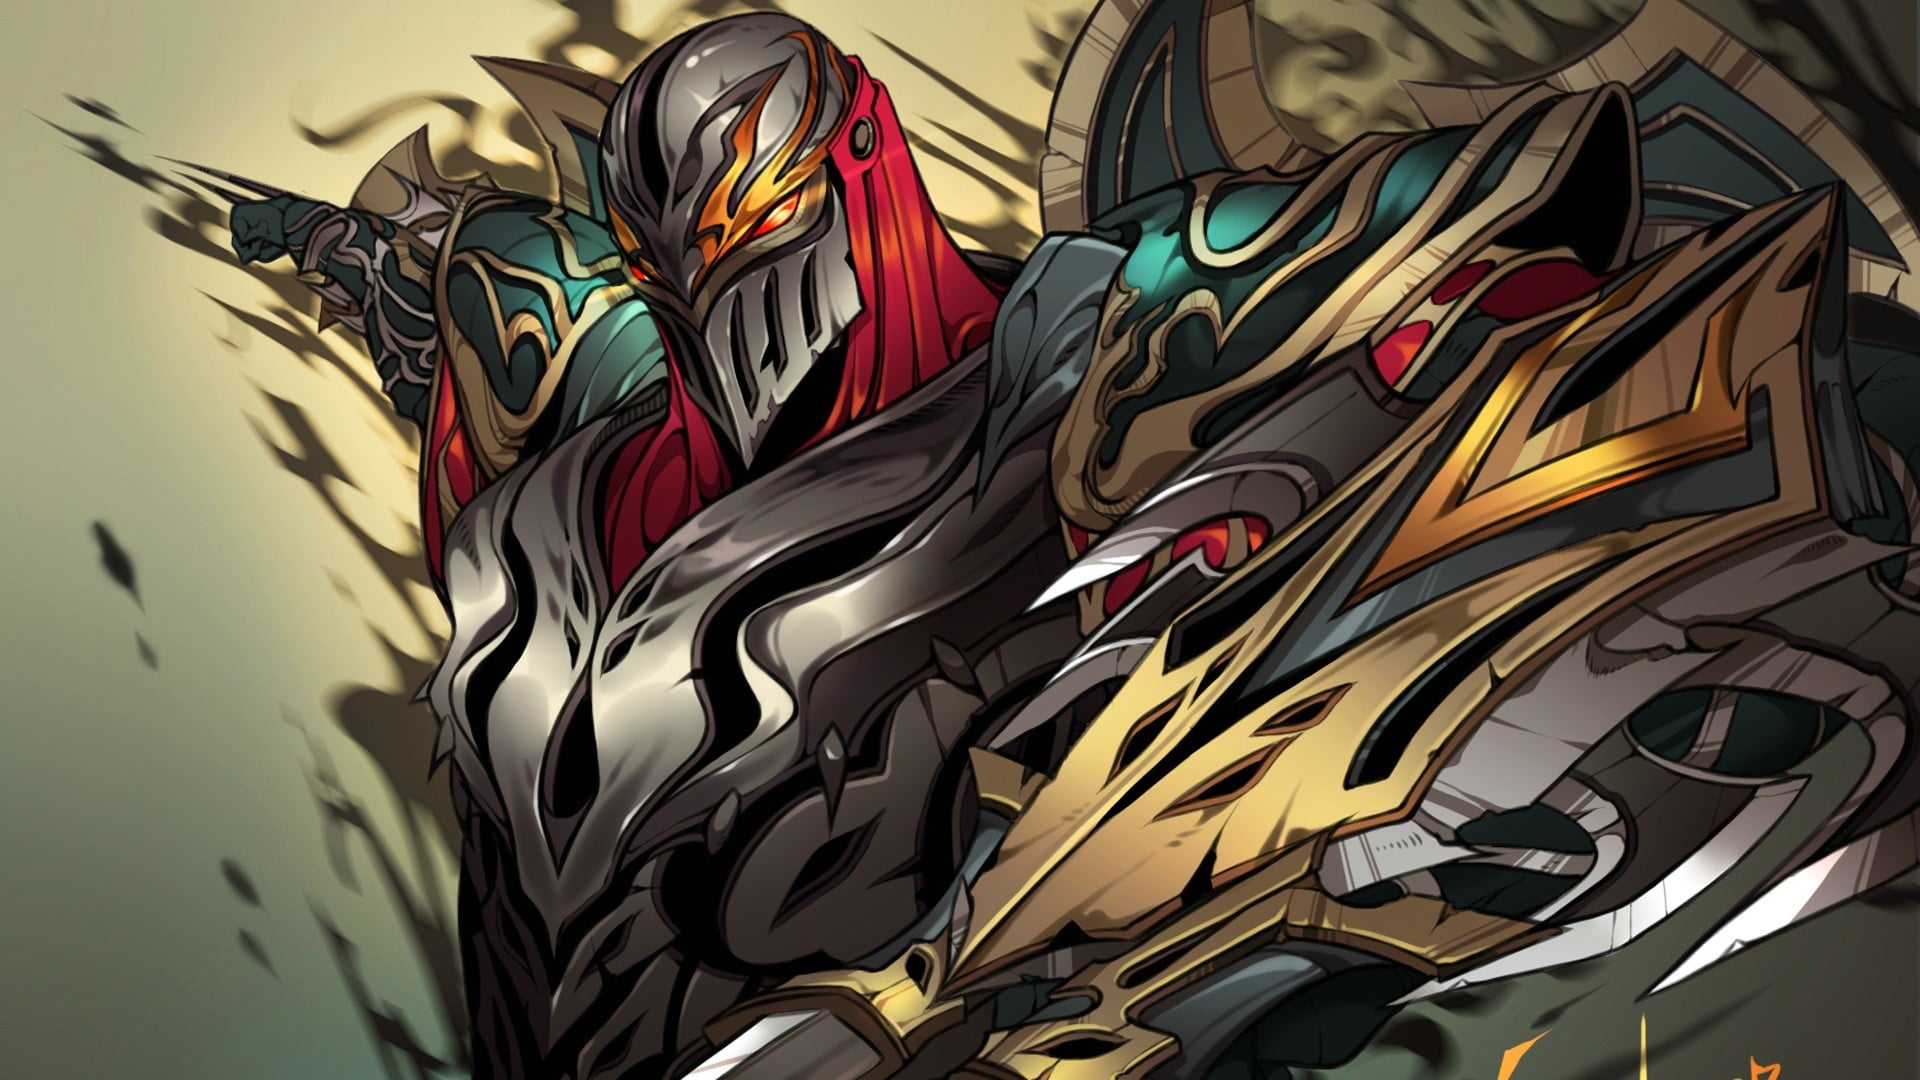 gray armored character digital wallpaper, Zed (League of Legends)